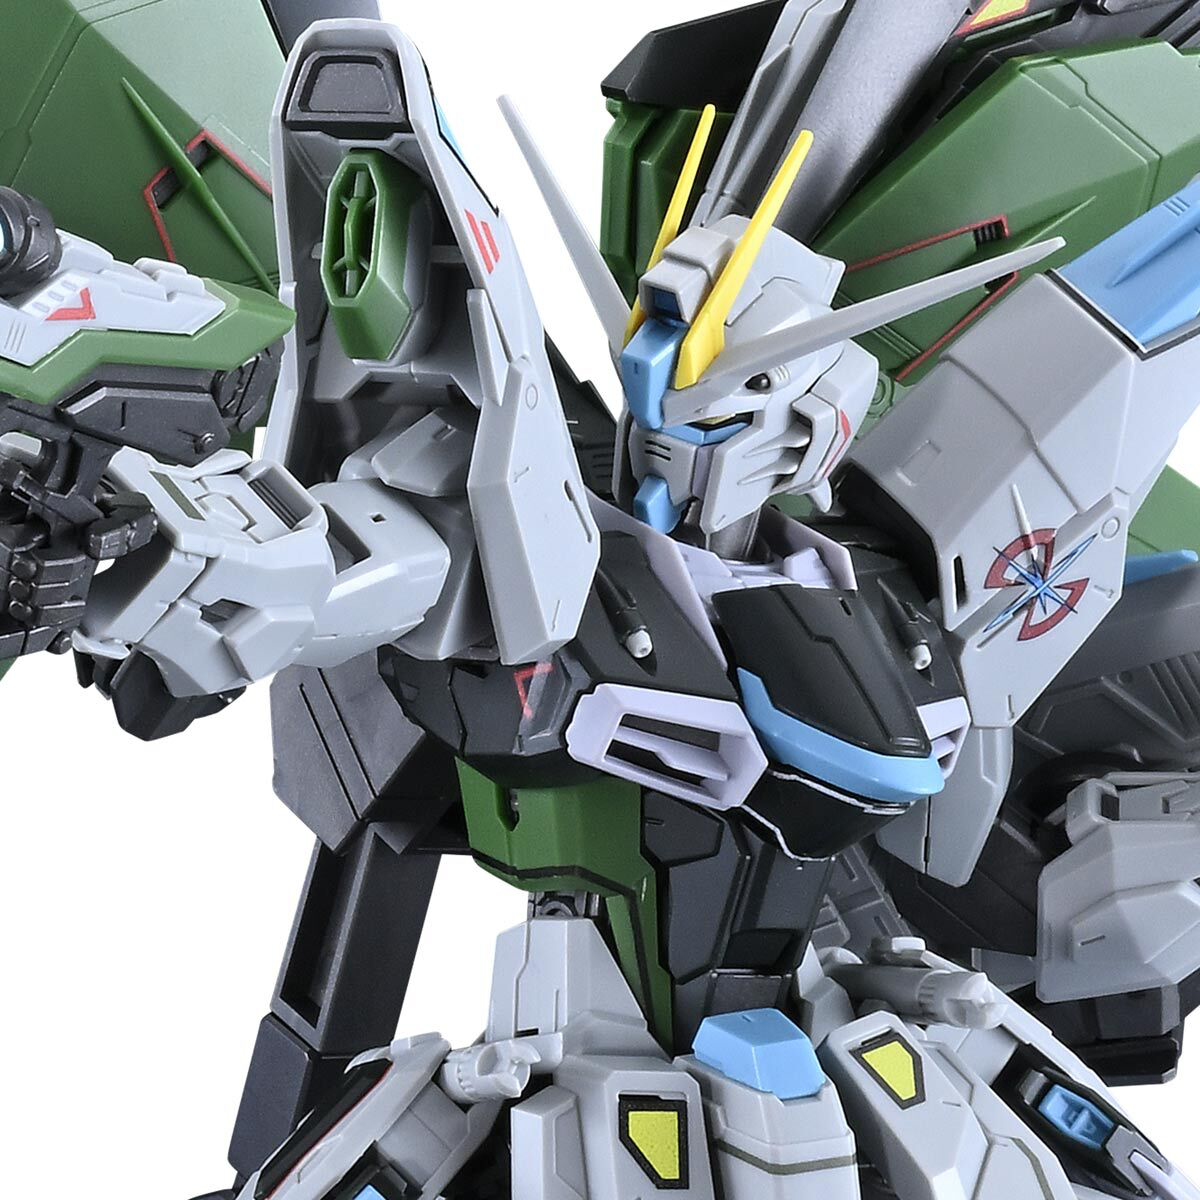 MG 1/100 Freedom Gundam Ver. 2.0 [Real Type Color] (February & March Ship Date)